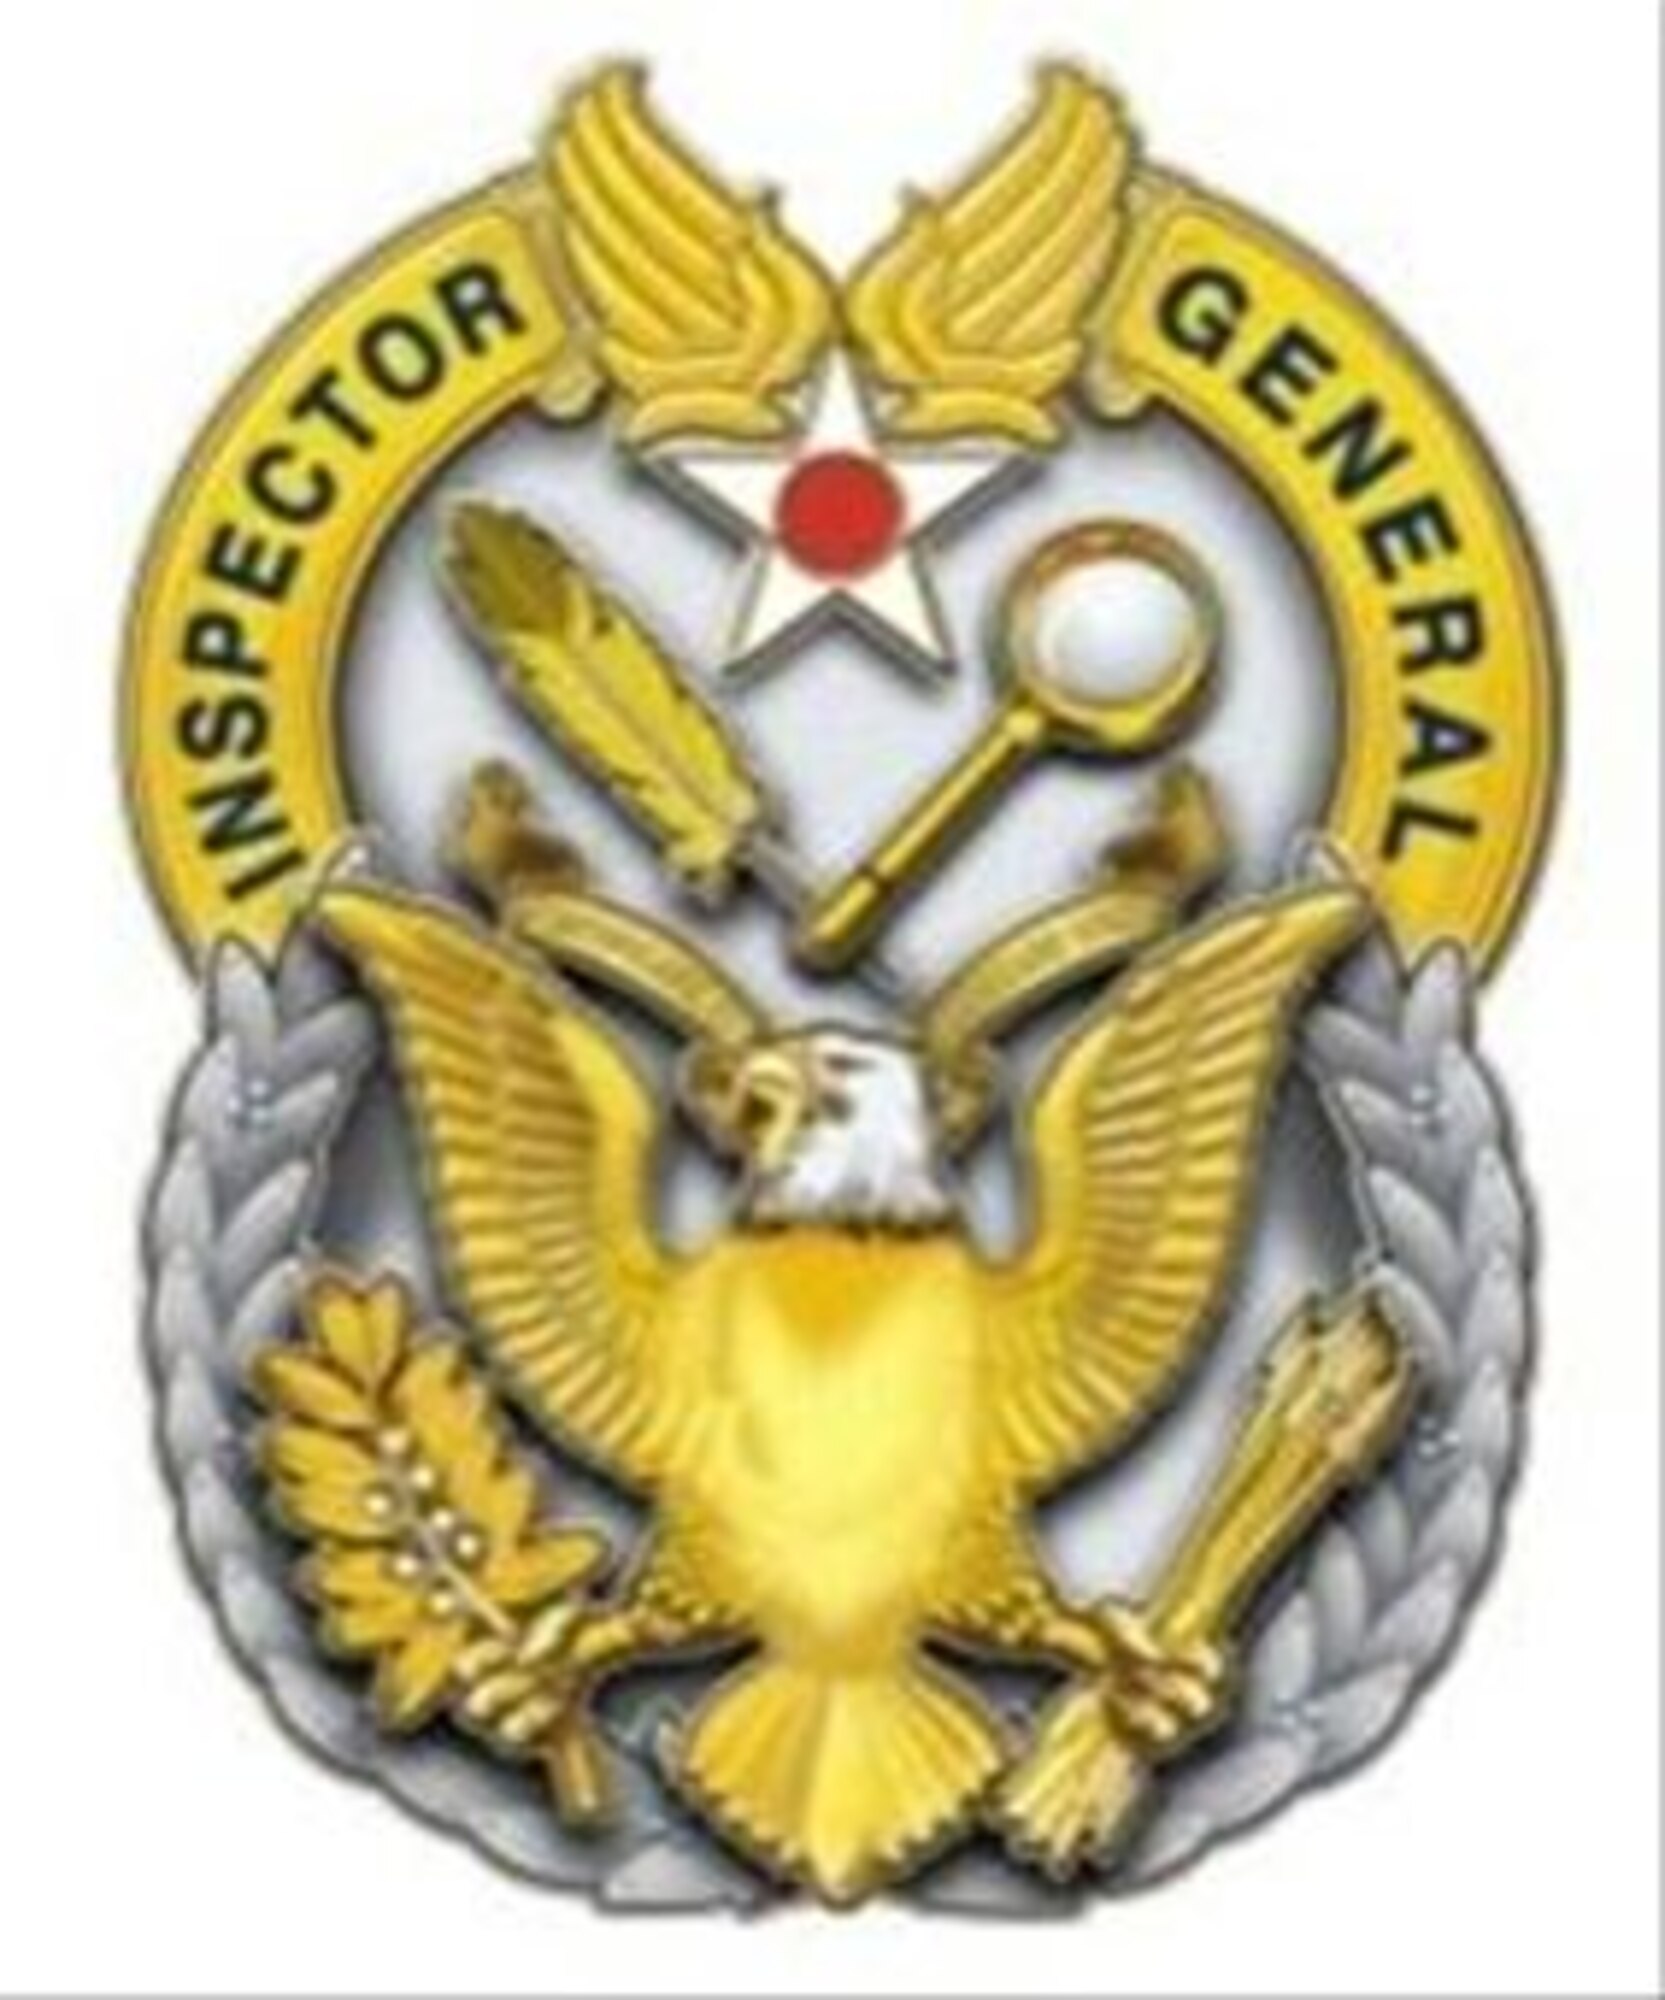 The inspector general office Air Force-wide adopted a new duty badge in August 2014, which is now worn by all assigned IG inspectors at RAF Mildenhall. (U.S. Air Force graphic)